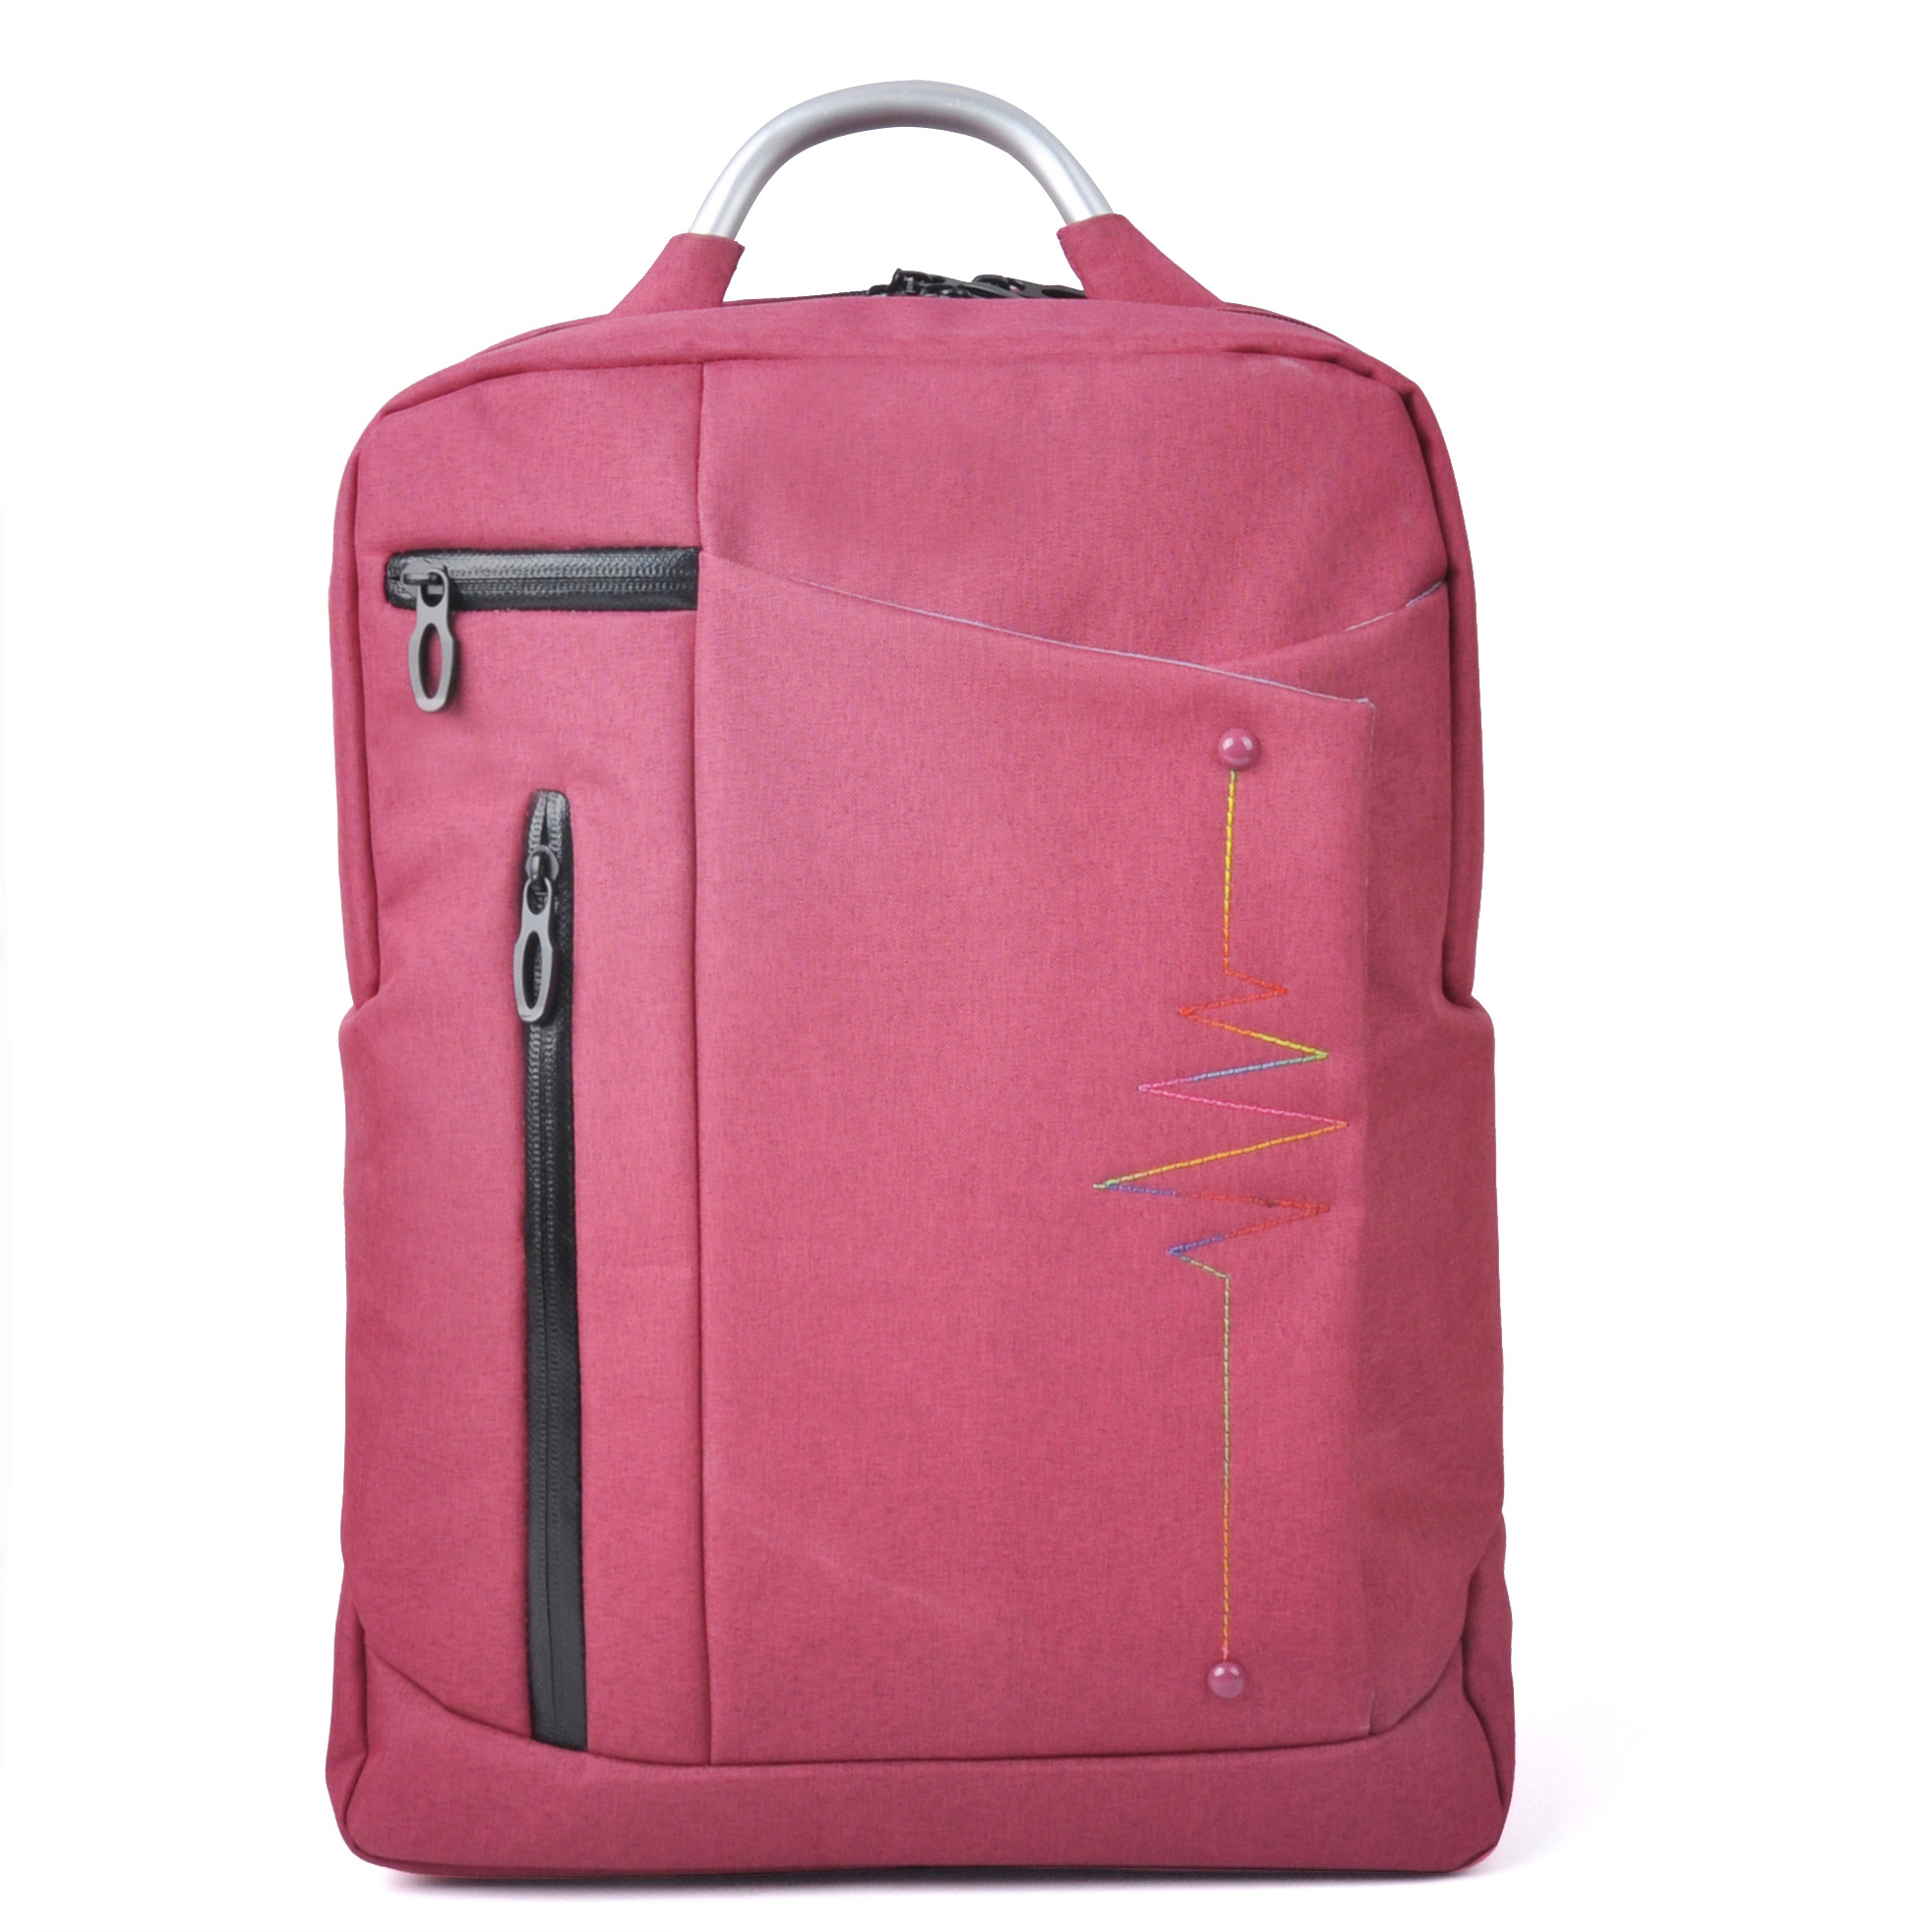 laptop backpack with aluminum gold handle